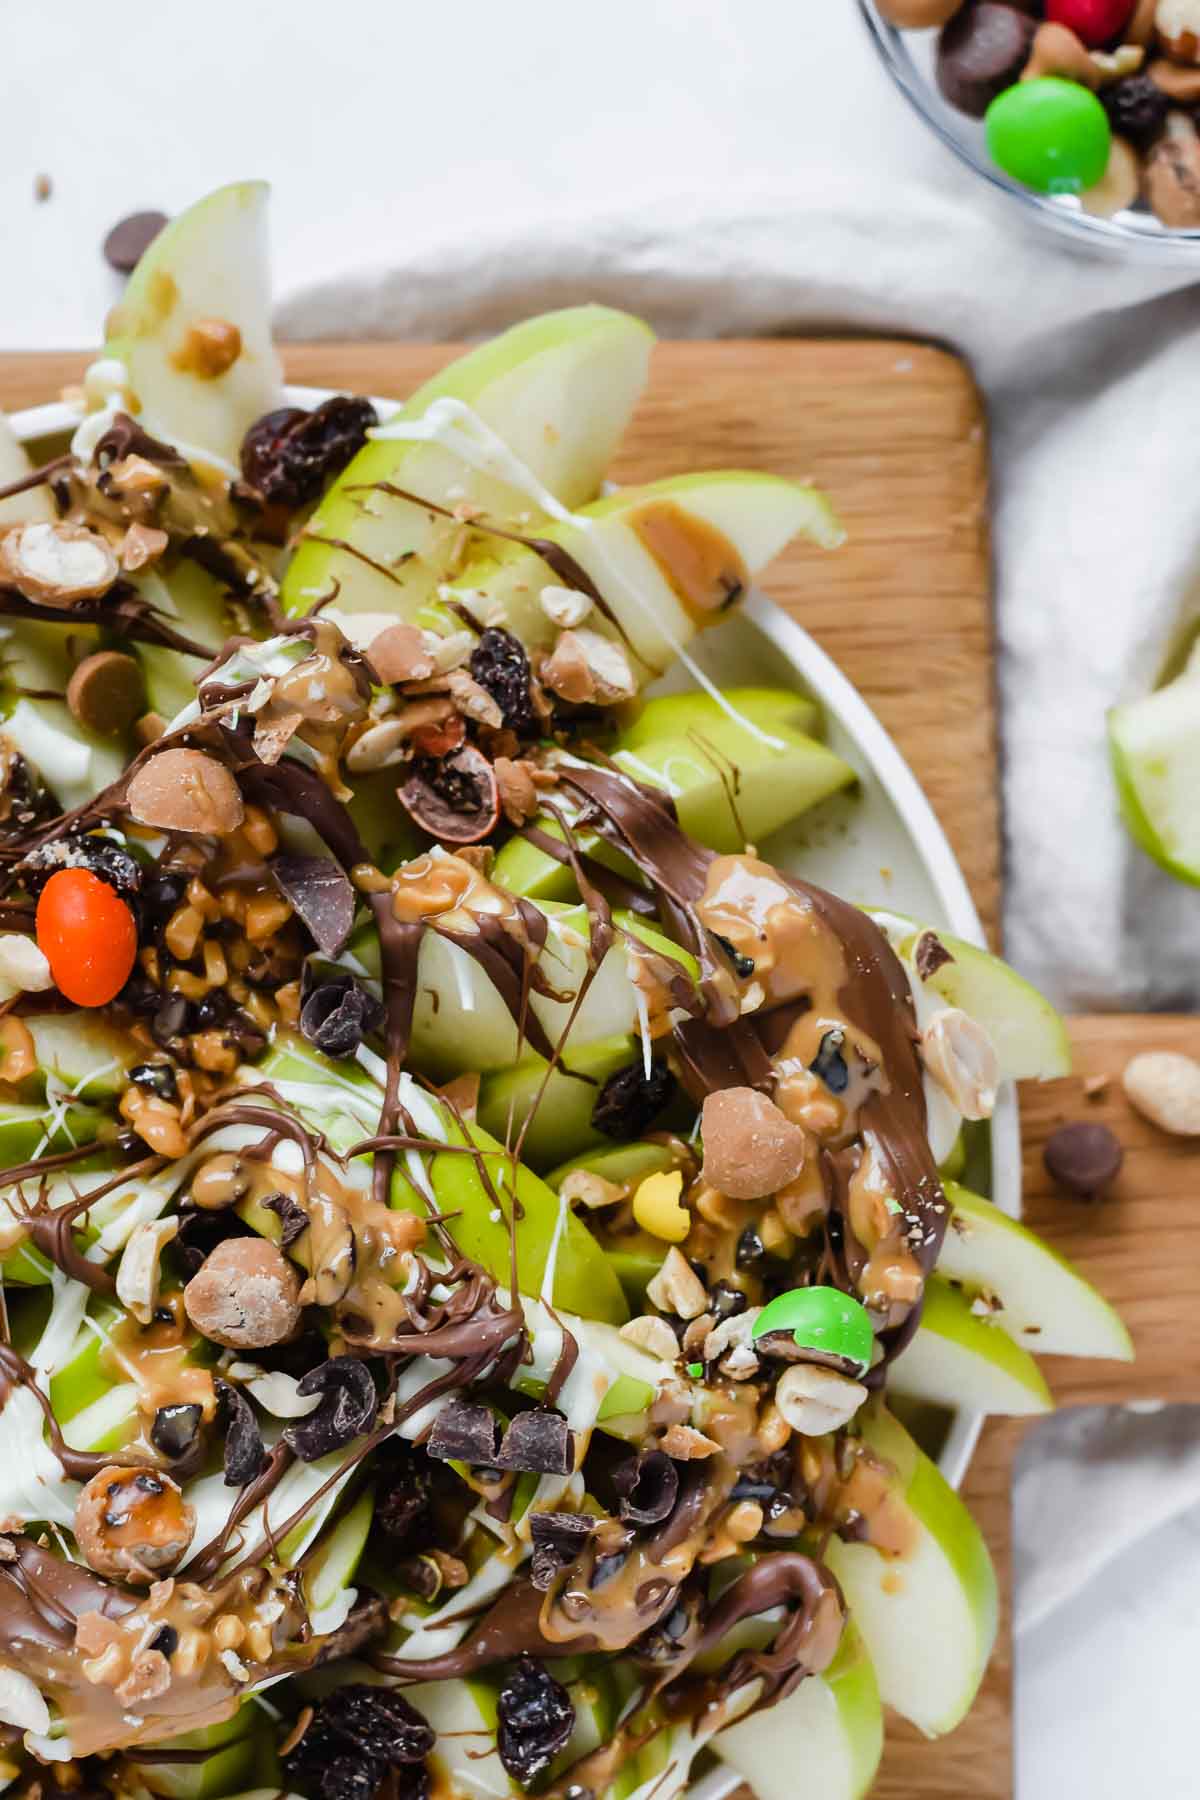 board full of apple nachos drizzled with chocolate and topped with trail mix.